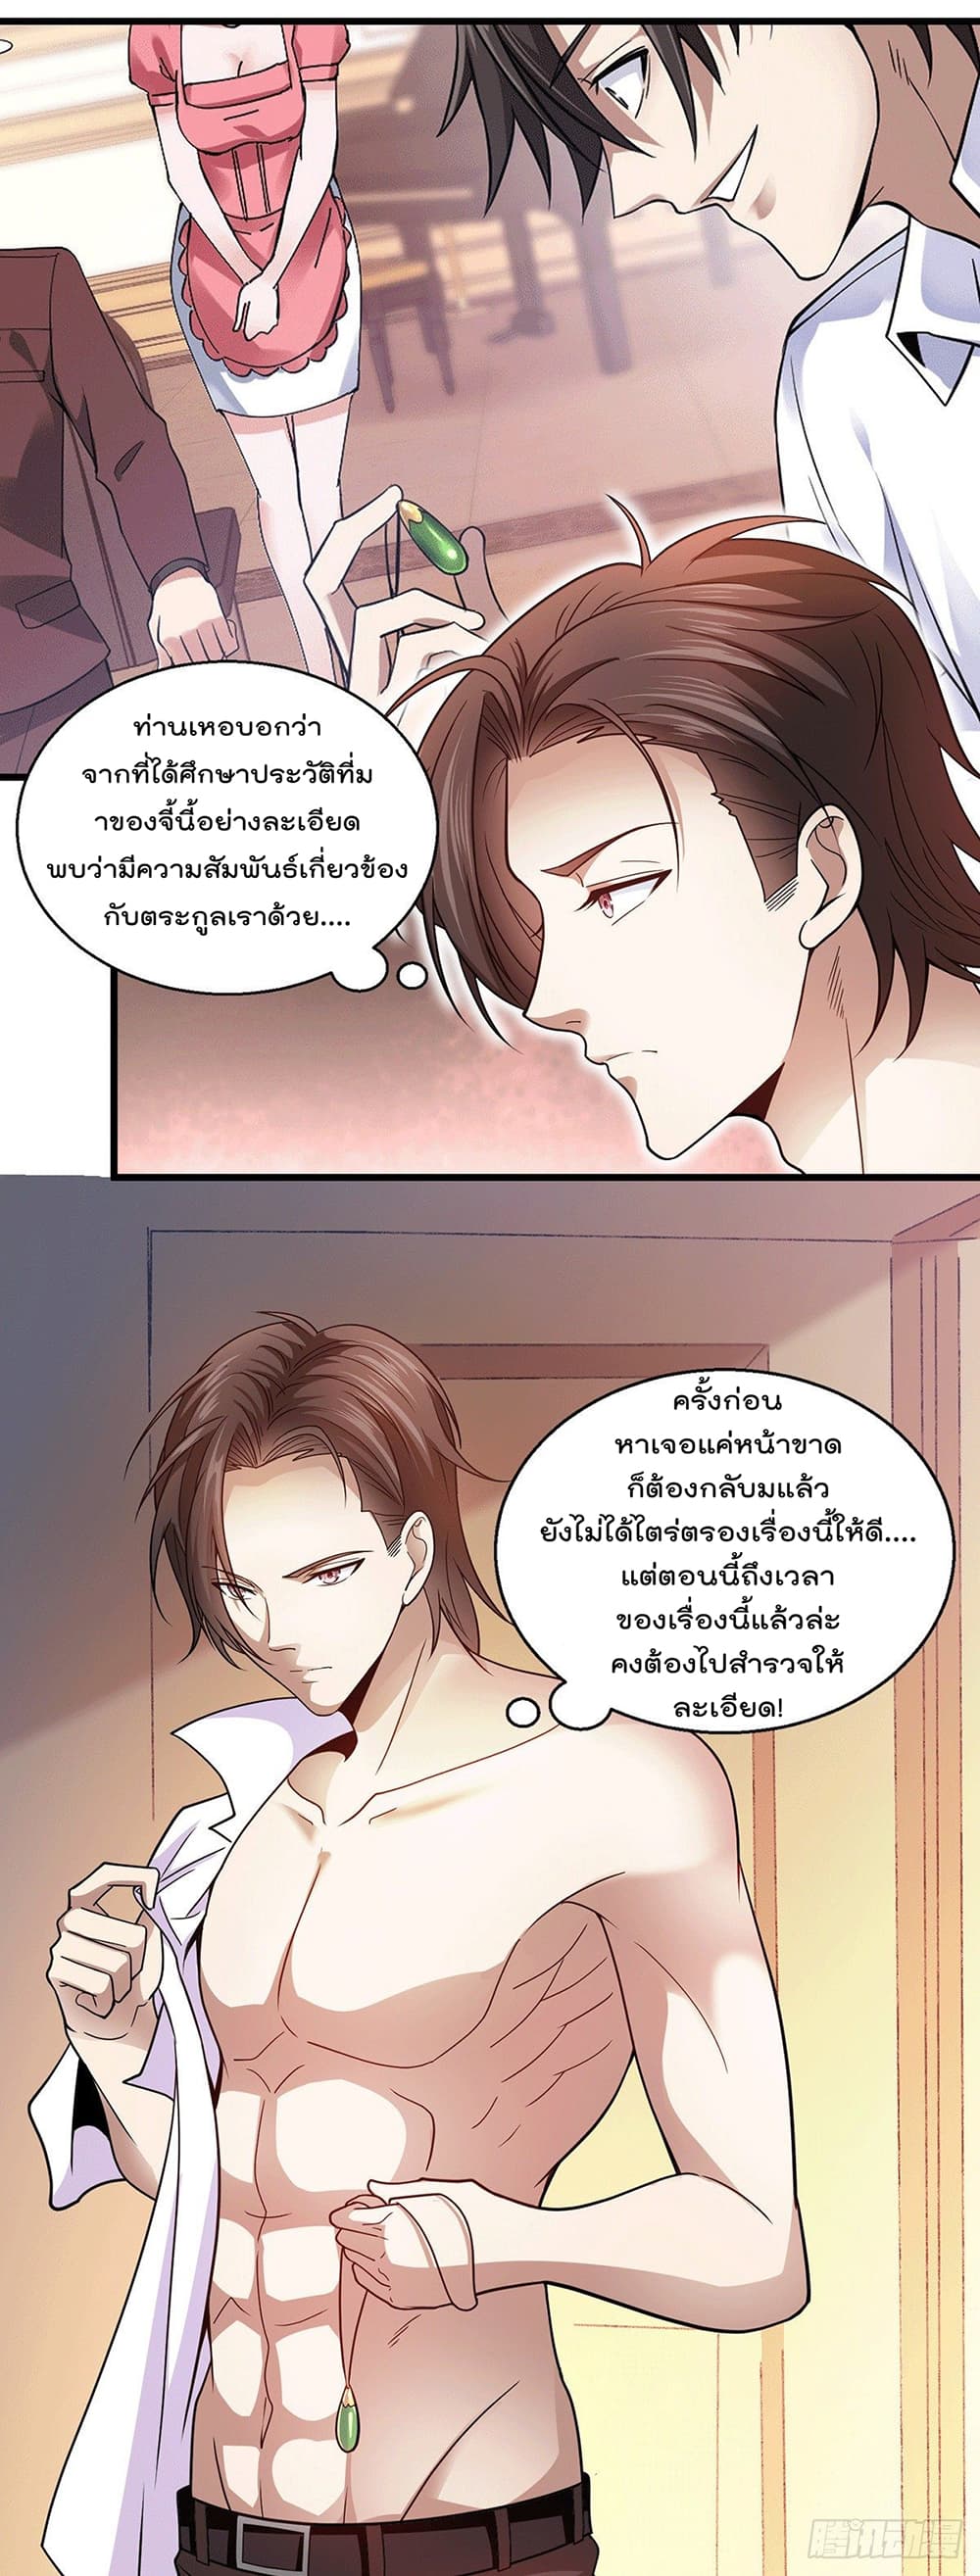 God Dragon of War in The City 50 (4)